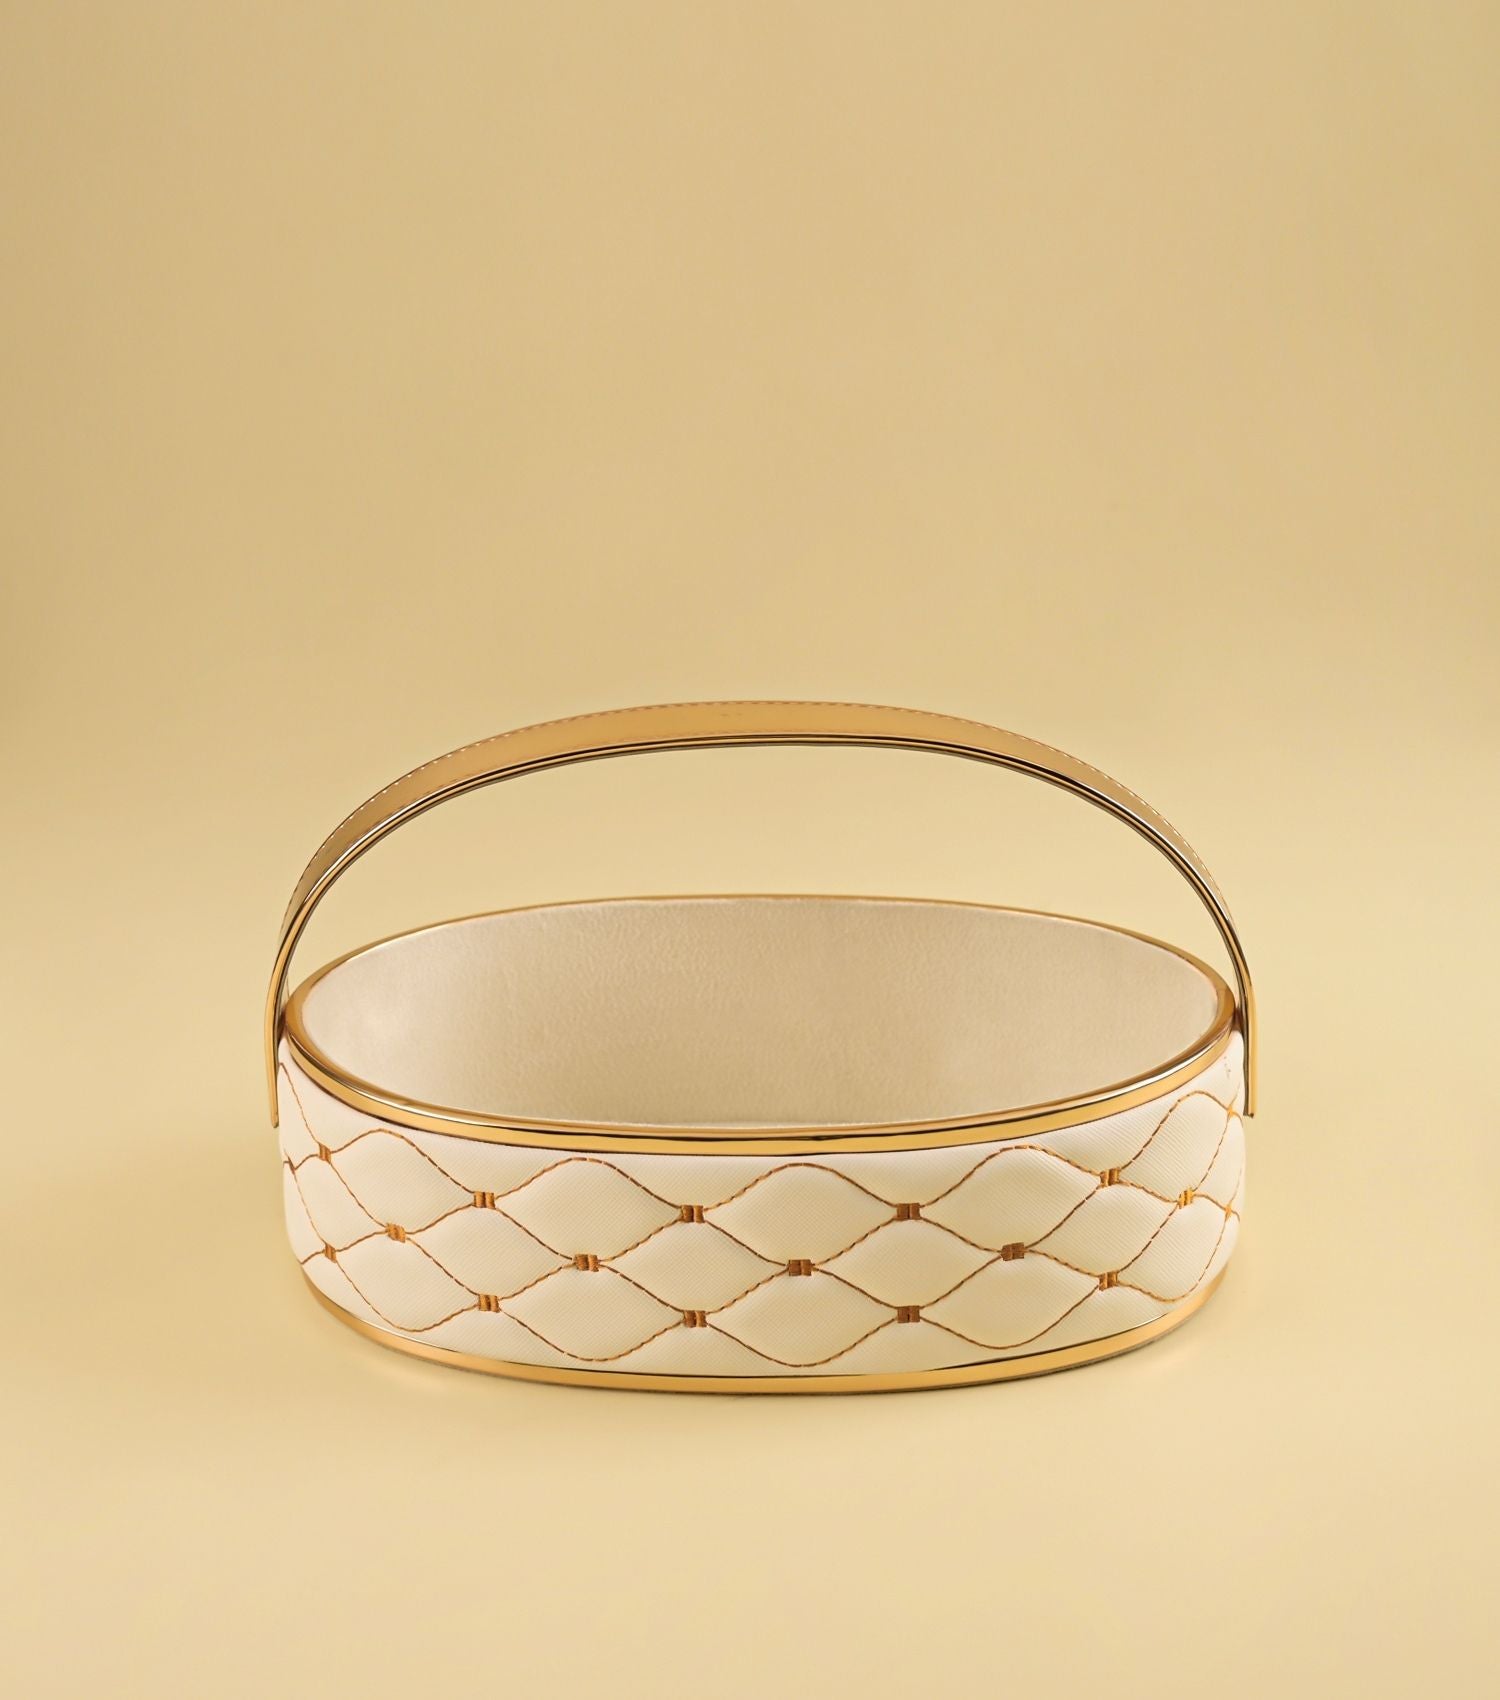 Quinn embroidered oval basket